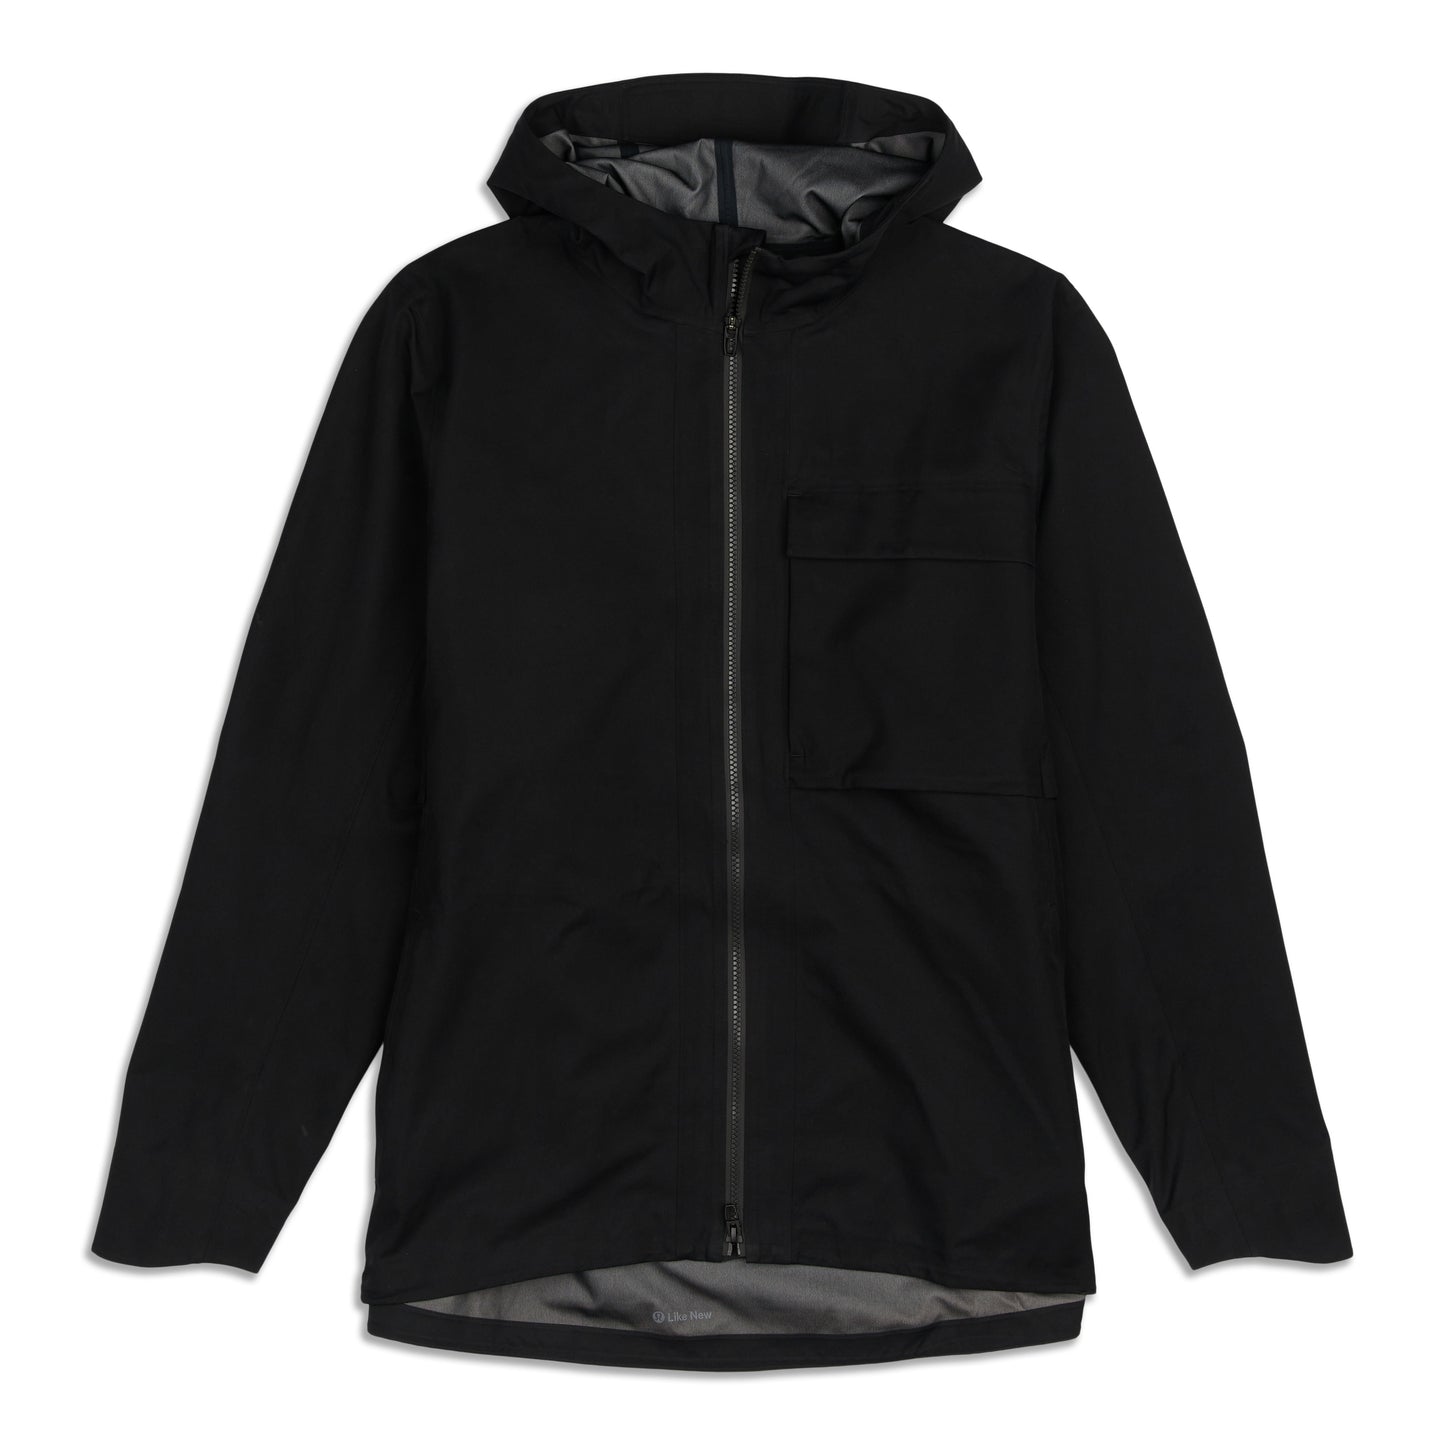 Outpour StretchSeal Jacket - Resale